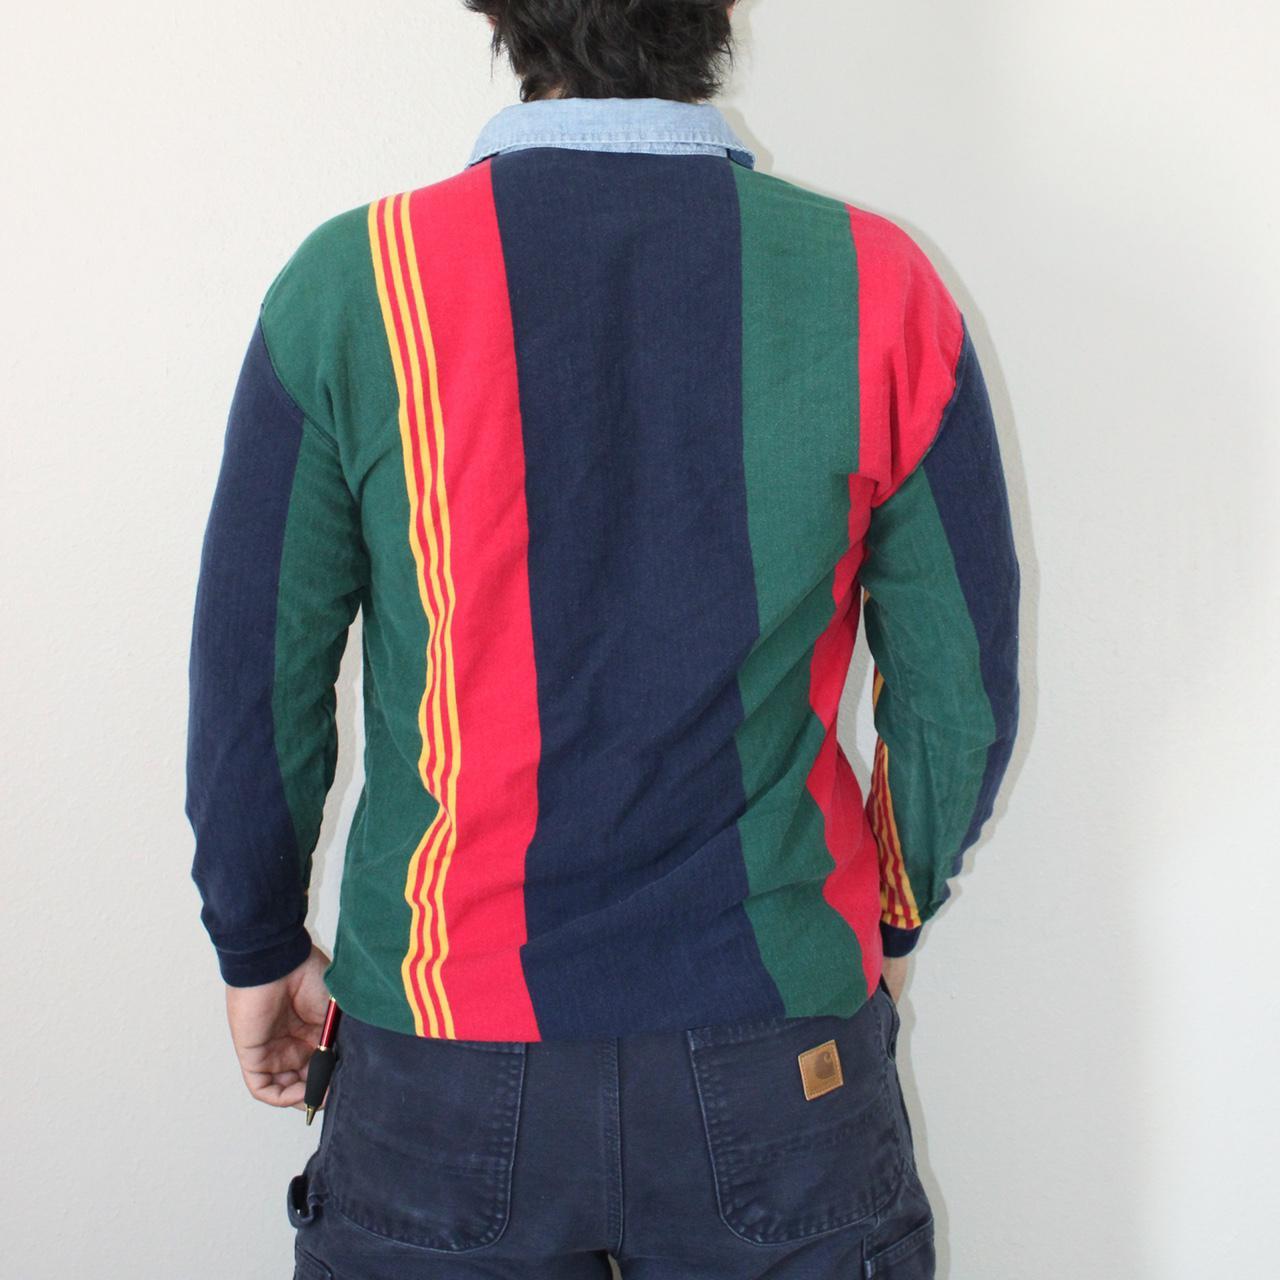 Product Image 2 - Vintage Striped Polo Shirt 

Excellent